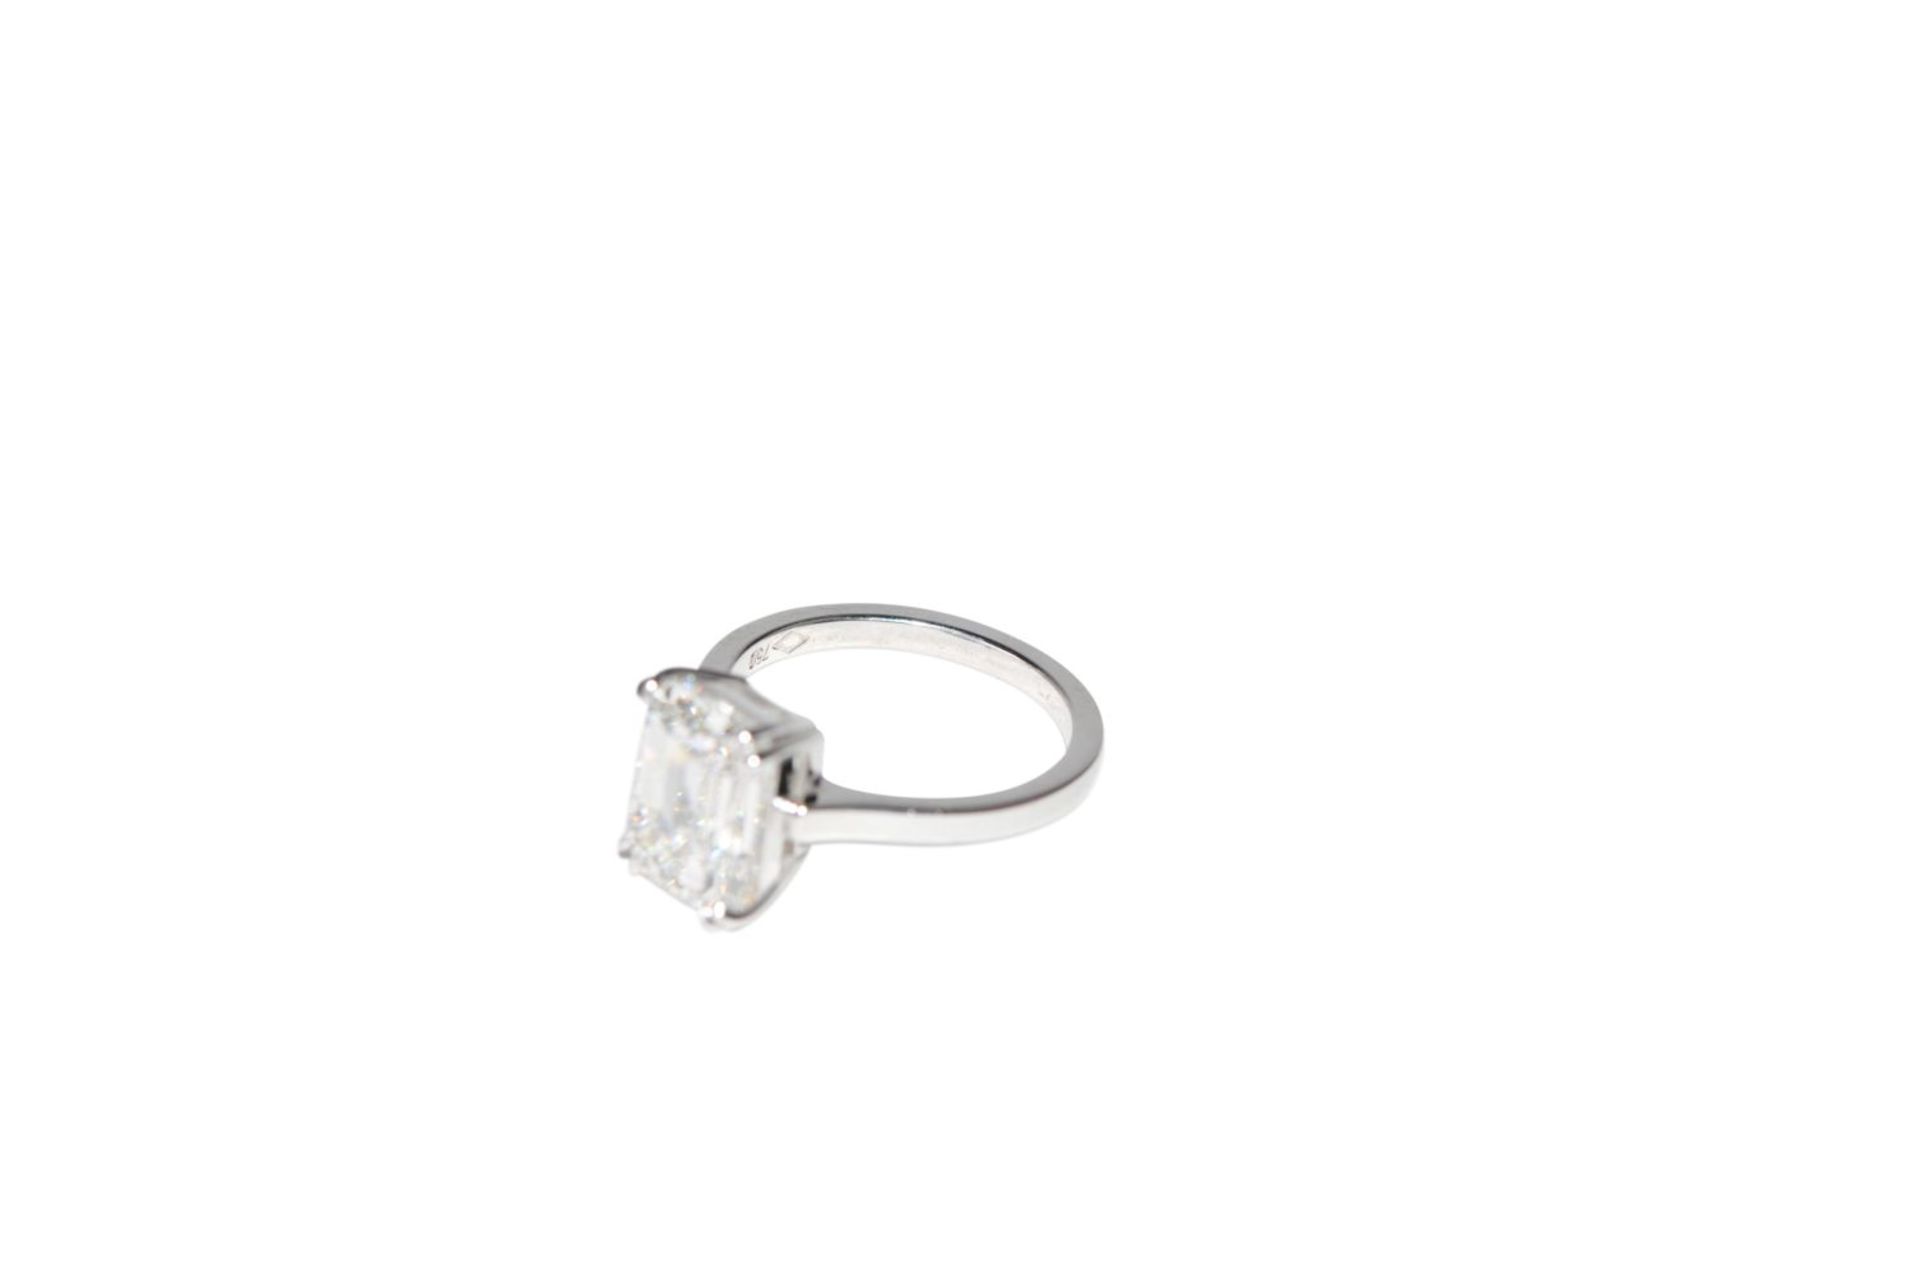 Diamond ring18 kt white gold ring with an emerald cut diamond, 5.01 ct, color G/vs2, total weight